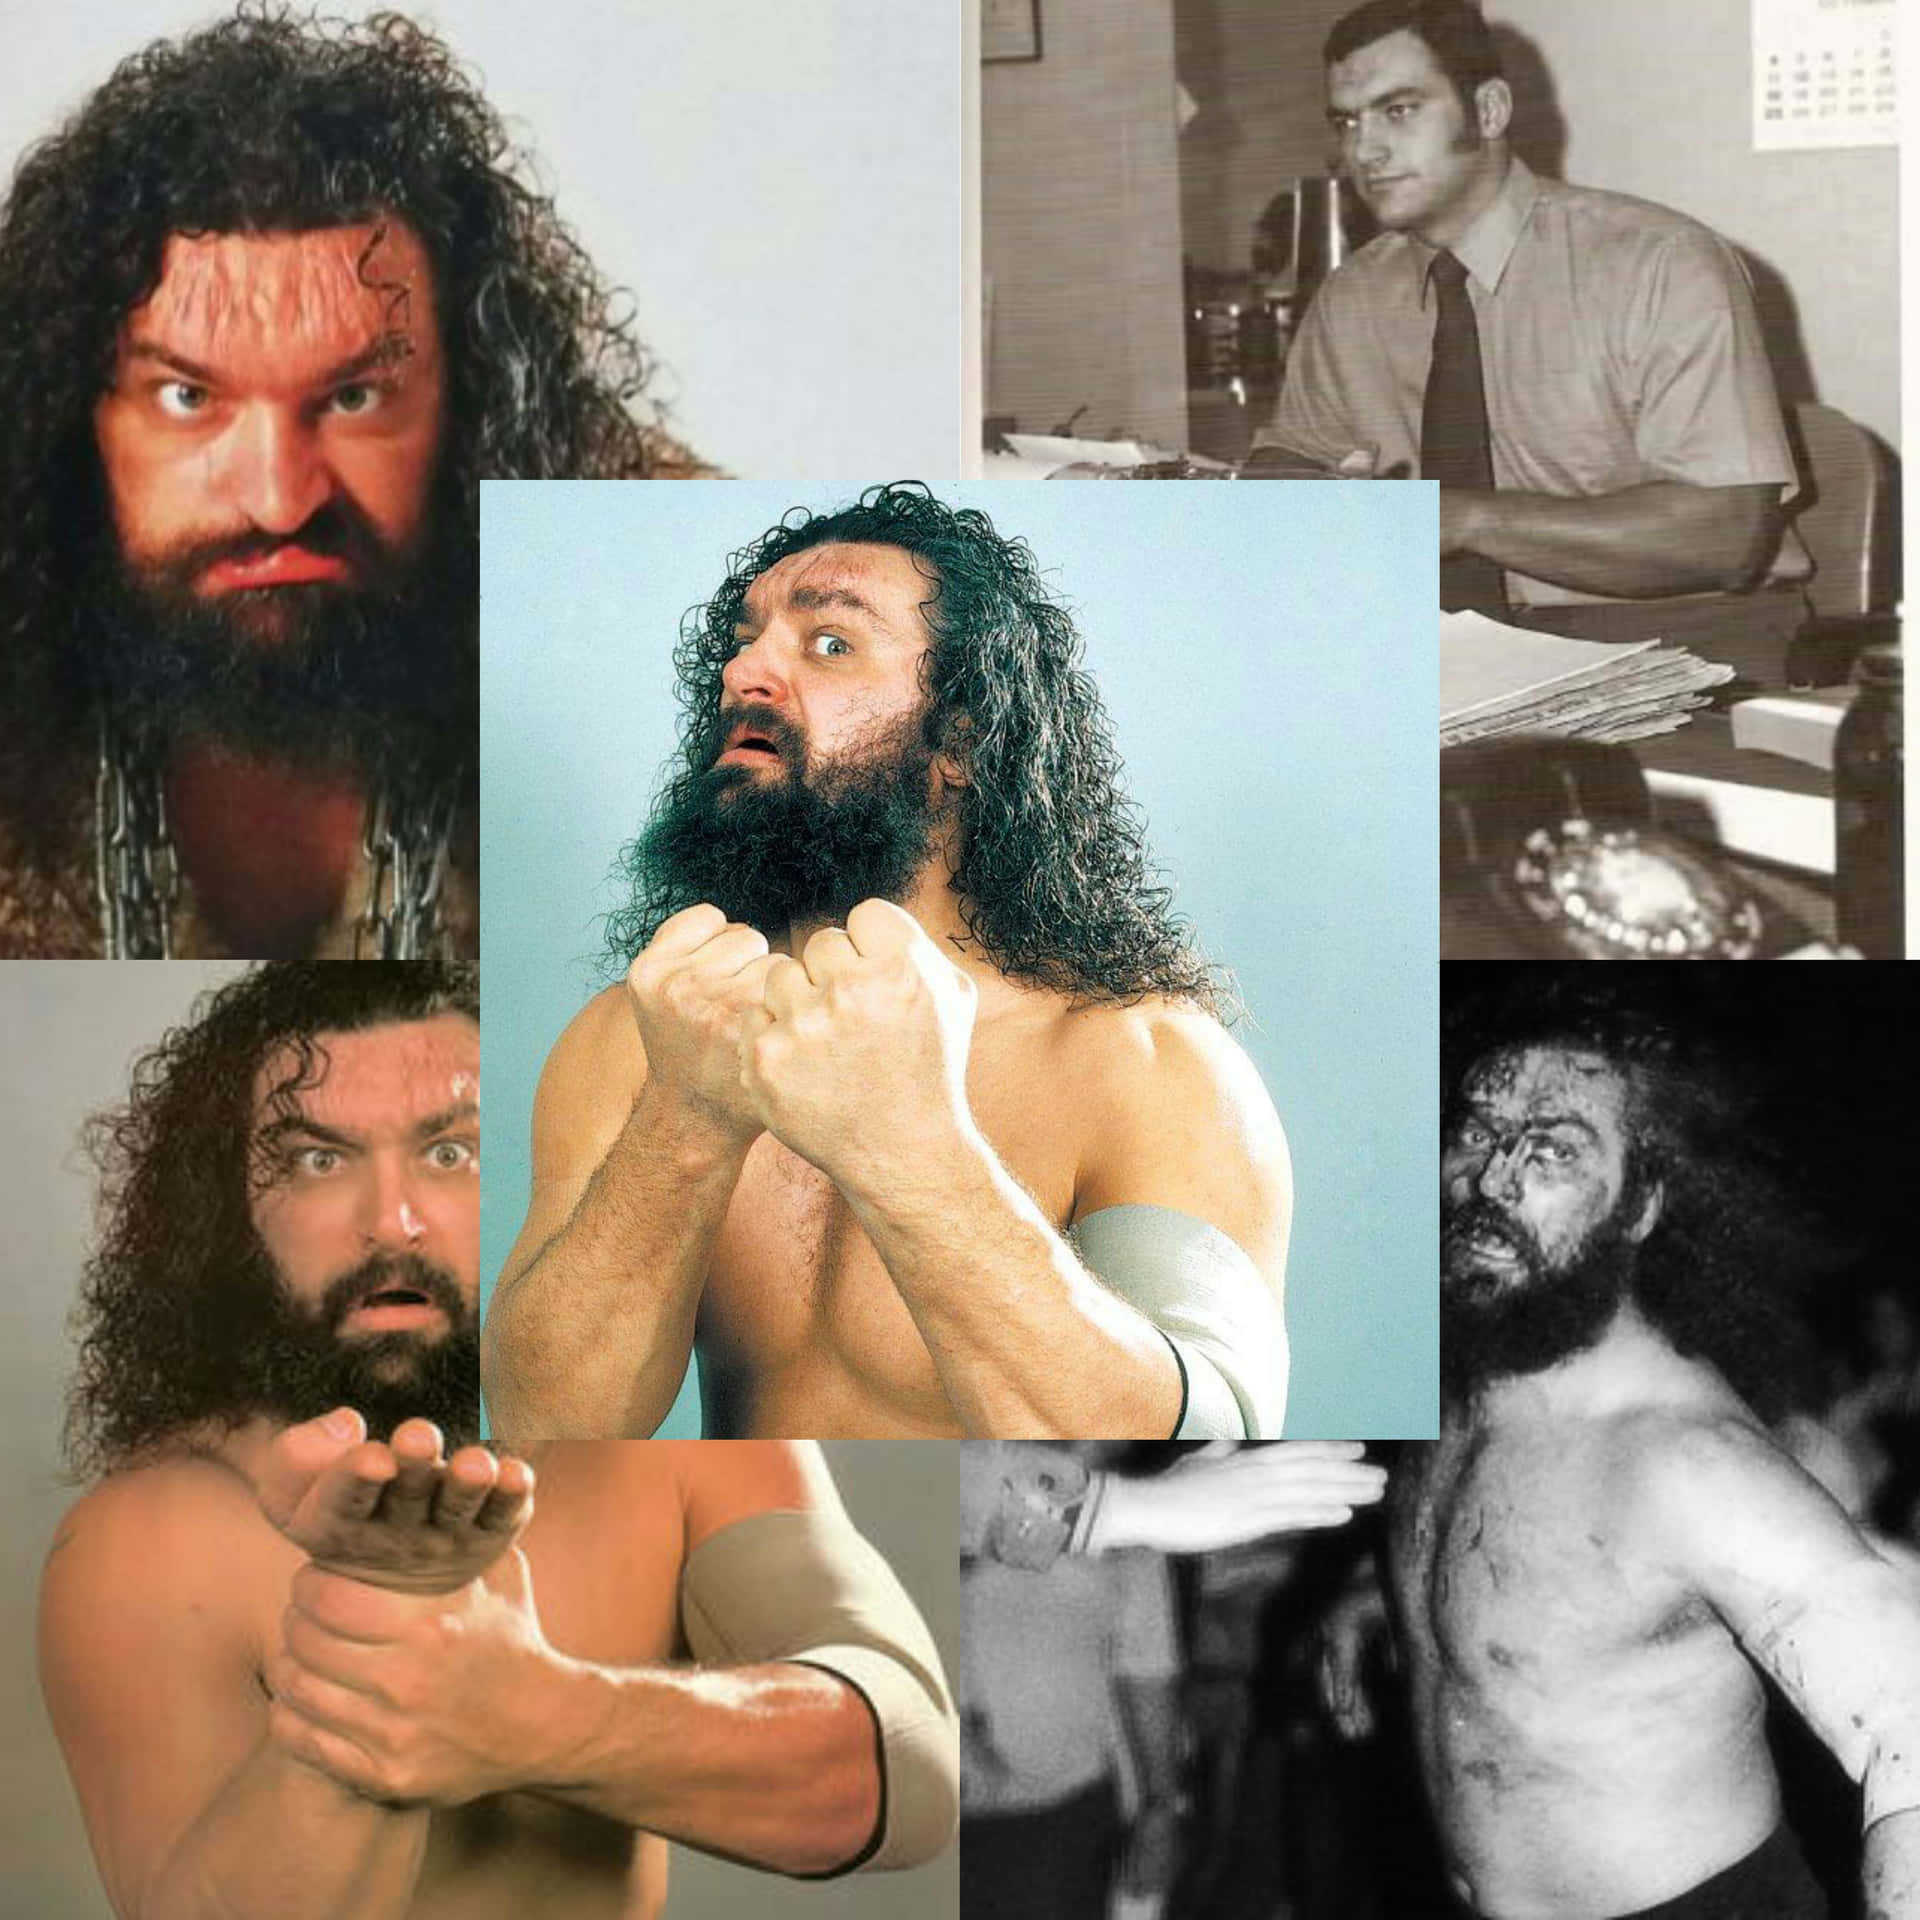 An Iconic Collage of WWE Wrestler, Bruiser Brody Wallpaper